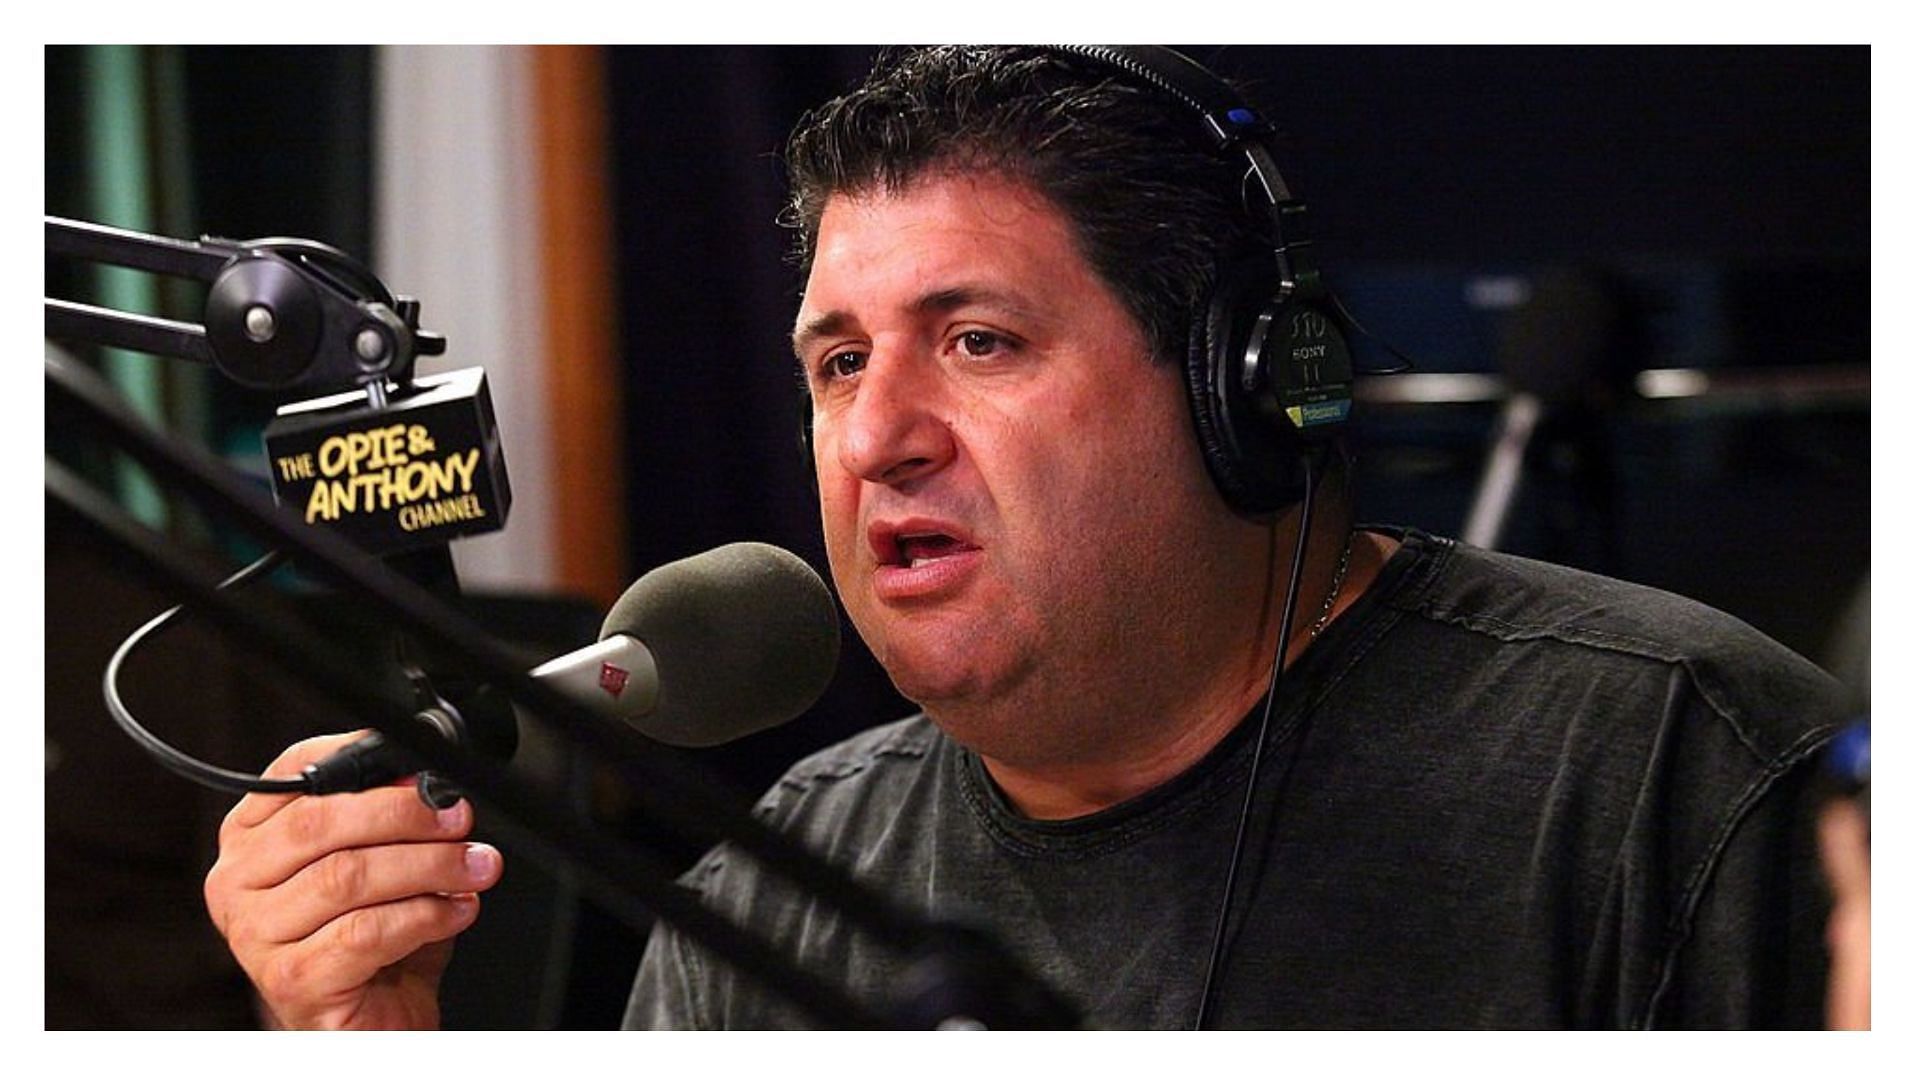 Siragusa visits &#039;The Opie &amp; Anthony Show&#039; at SiriusXM Studio (Image via Astrid Stawiarz/Getty Images)